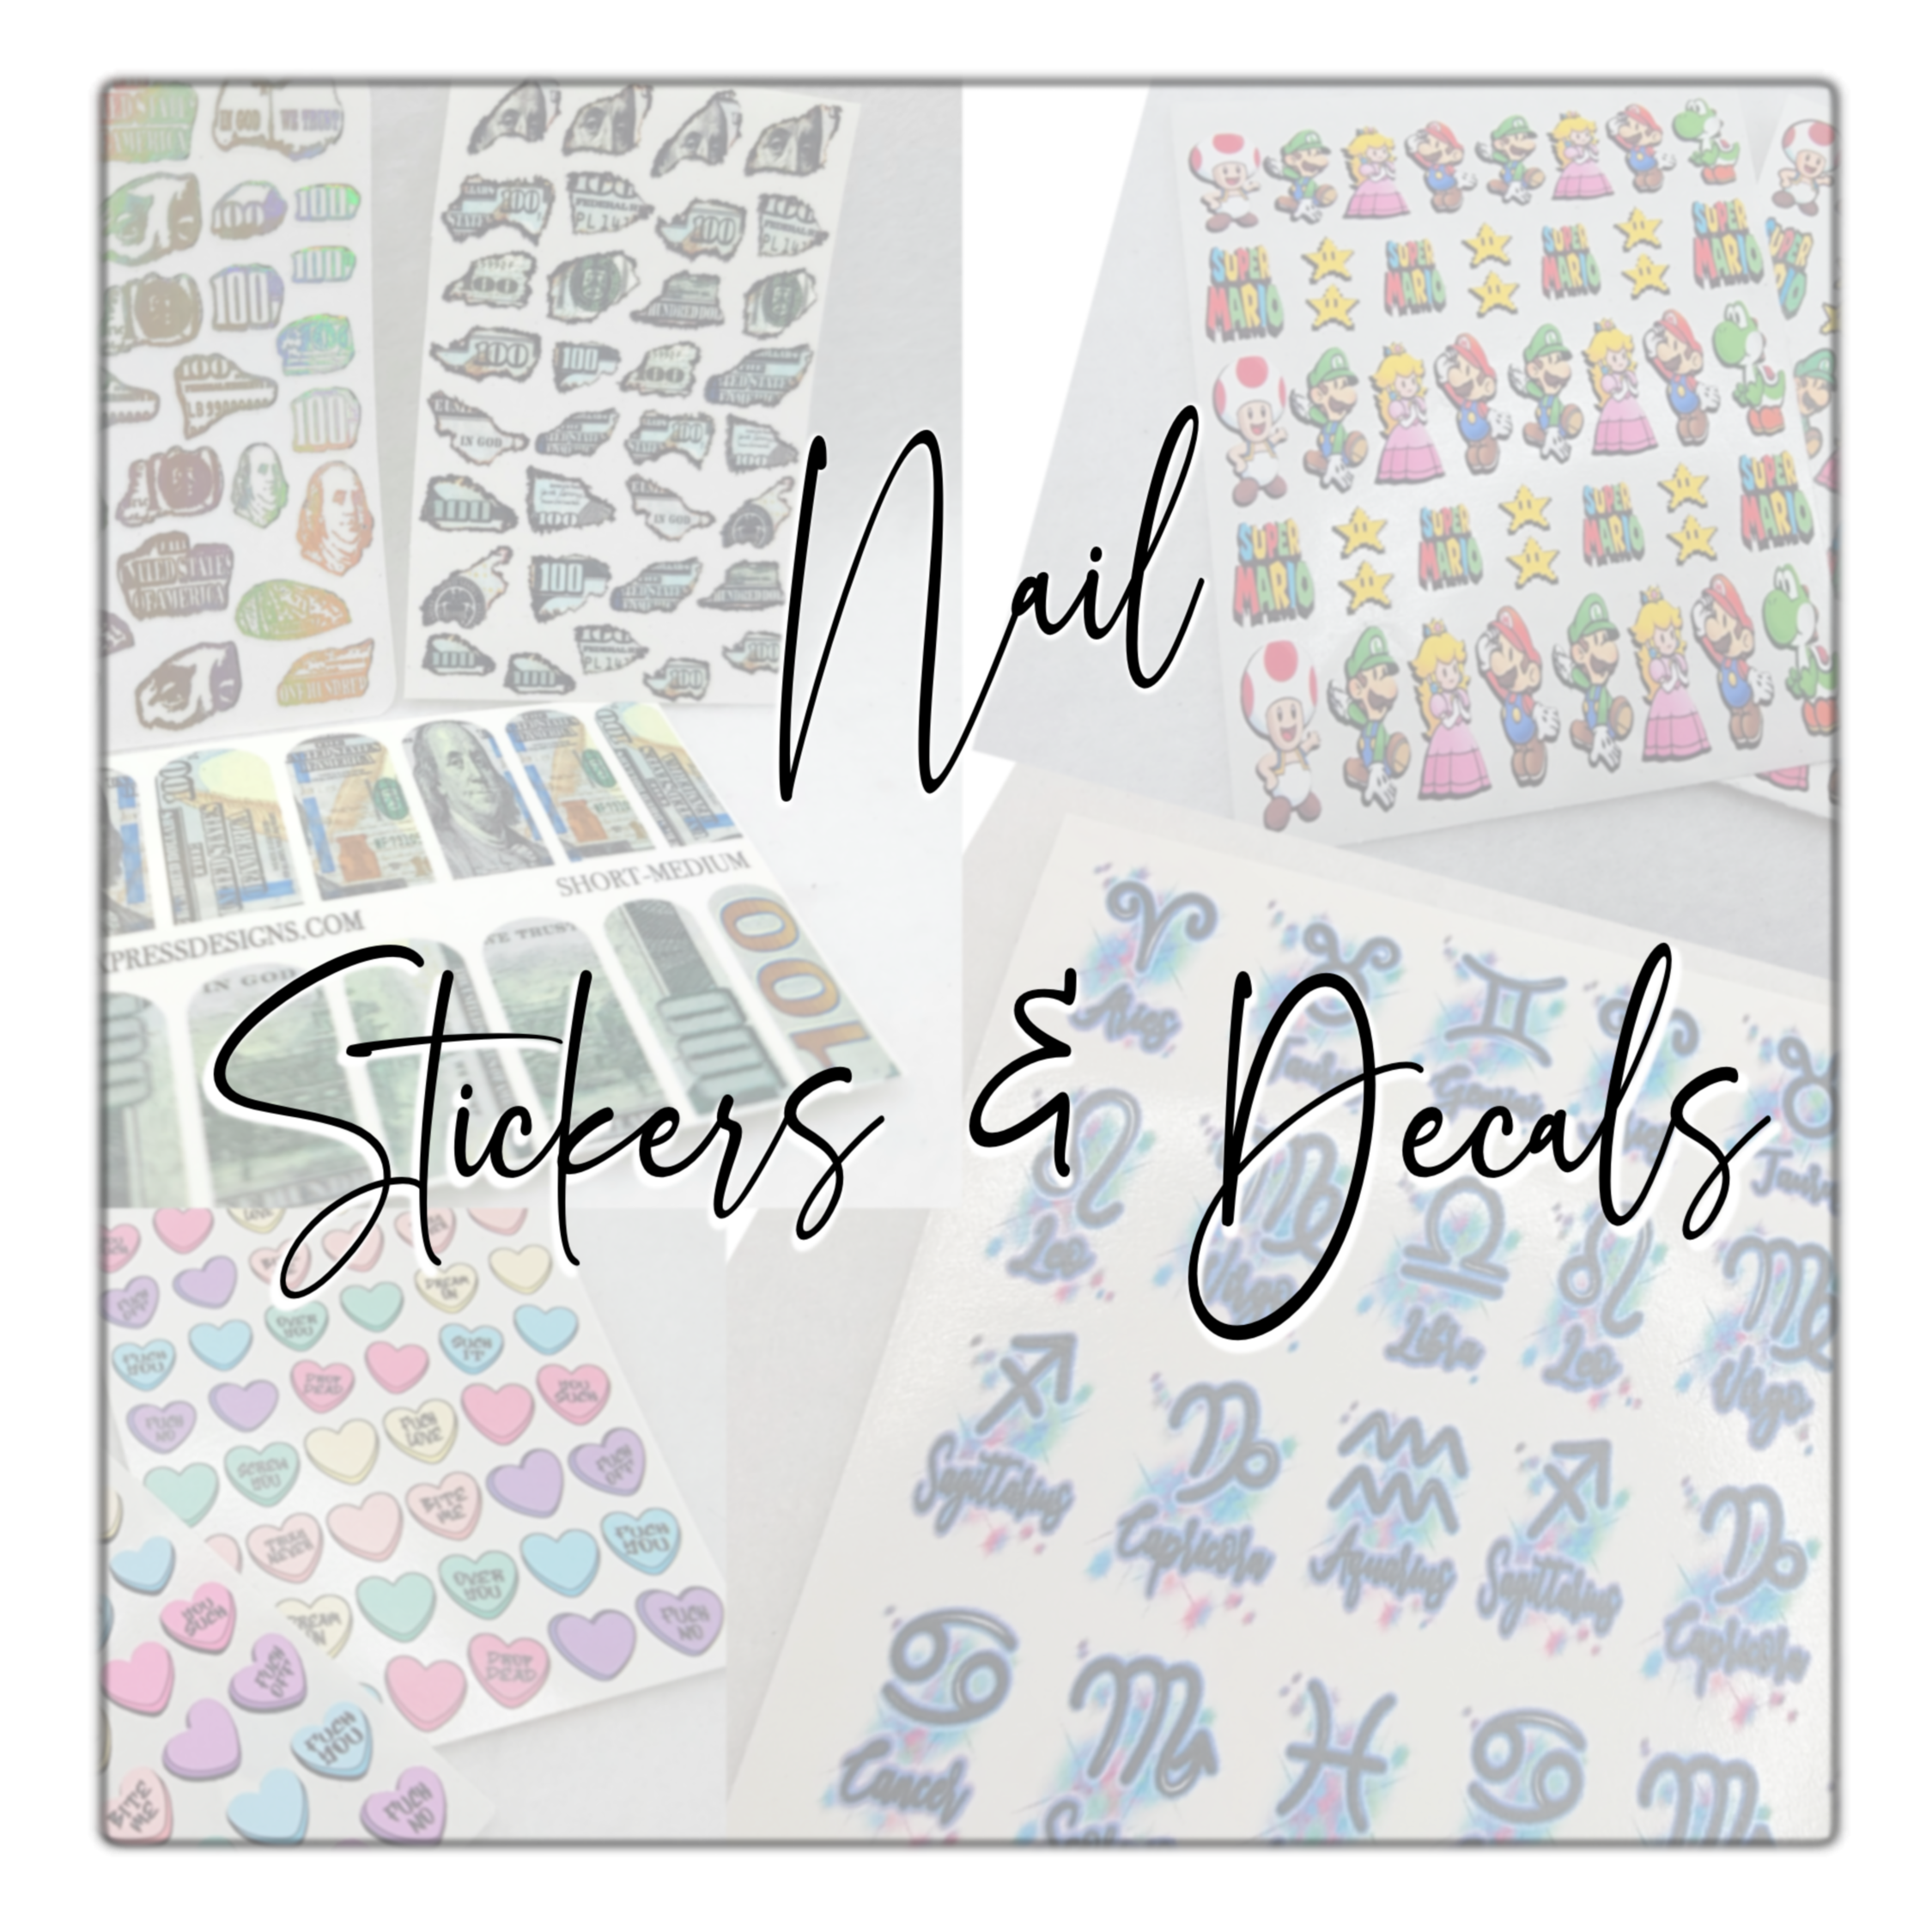 Nail Stickers & Decals